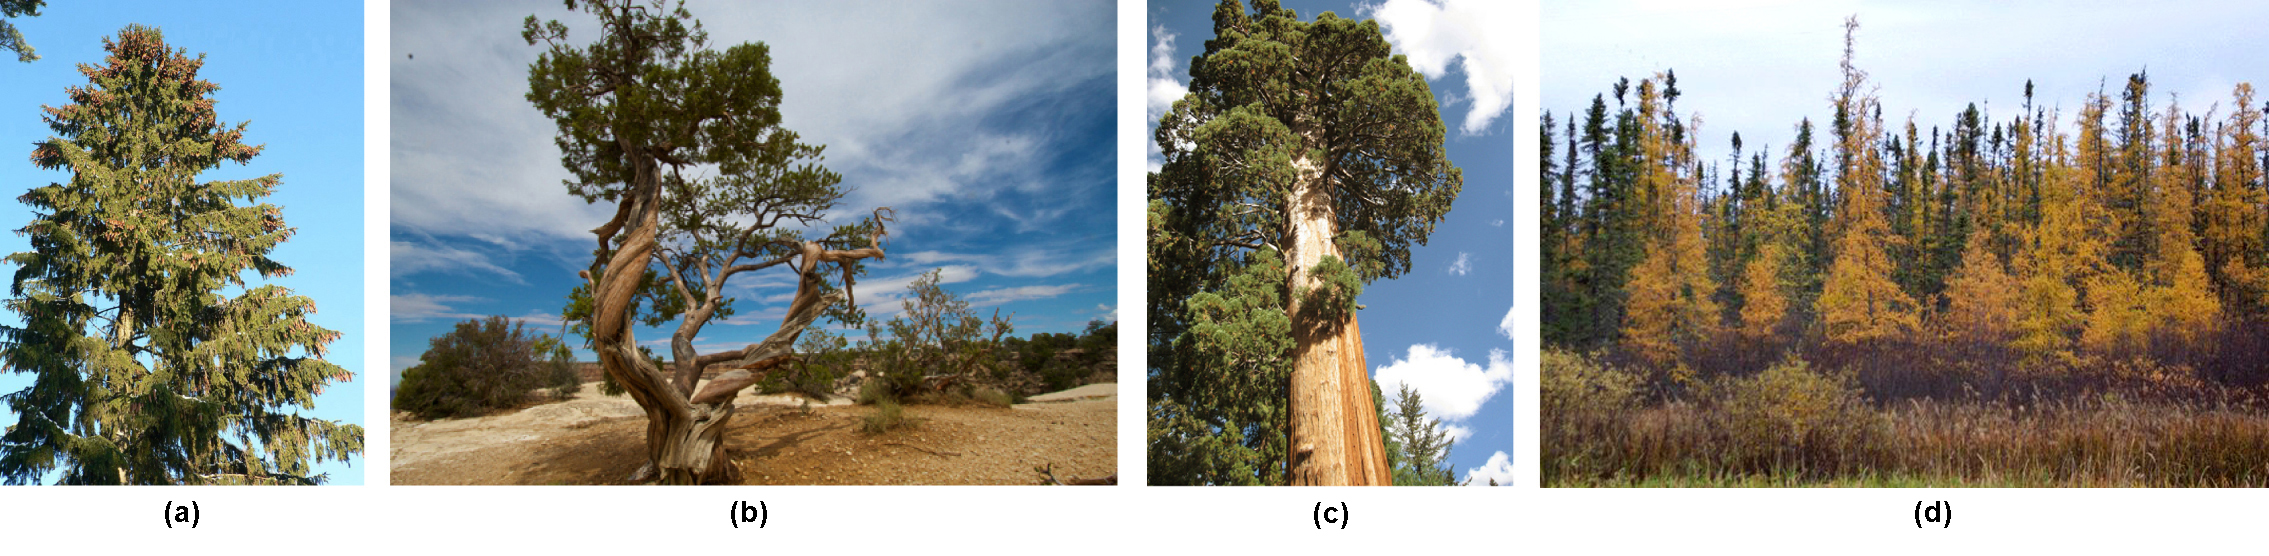 Photo A shows a juniper tree with a gnarled trunk. Photo B shows a sequoia with a tall, broad trunk and branches starting high up the trunk. Photo C shows a forest of tamarack with yellow needles. Photo D shows a tall spruce tree covered in pine cones. Photo B. Photo C Part D